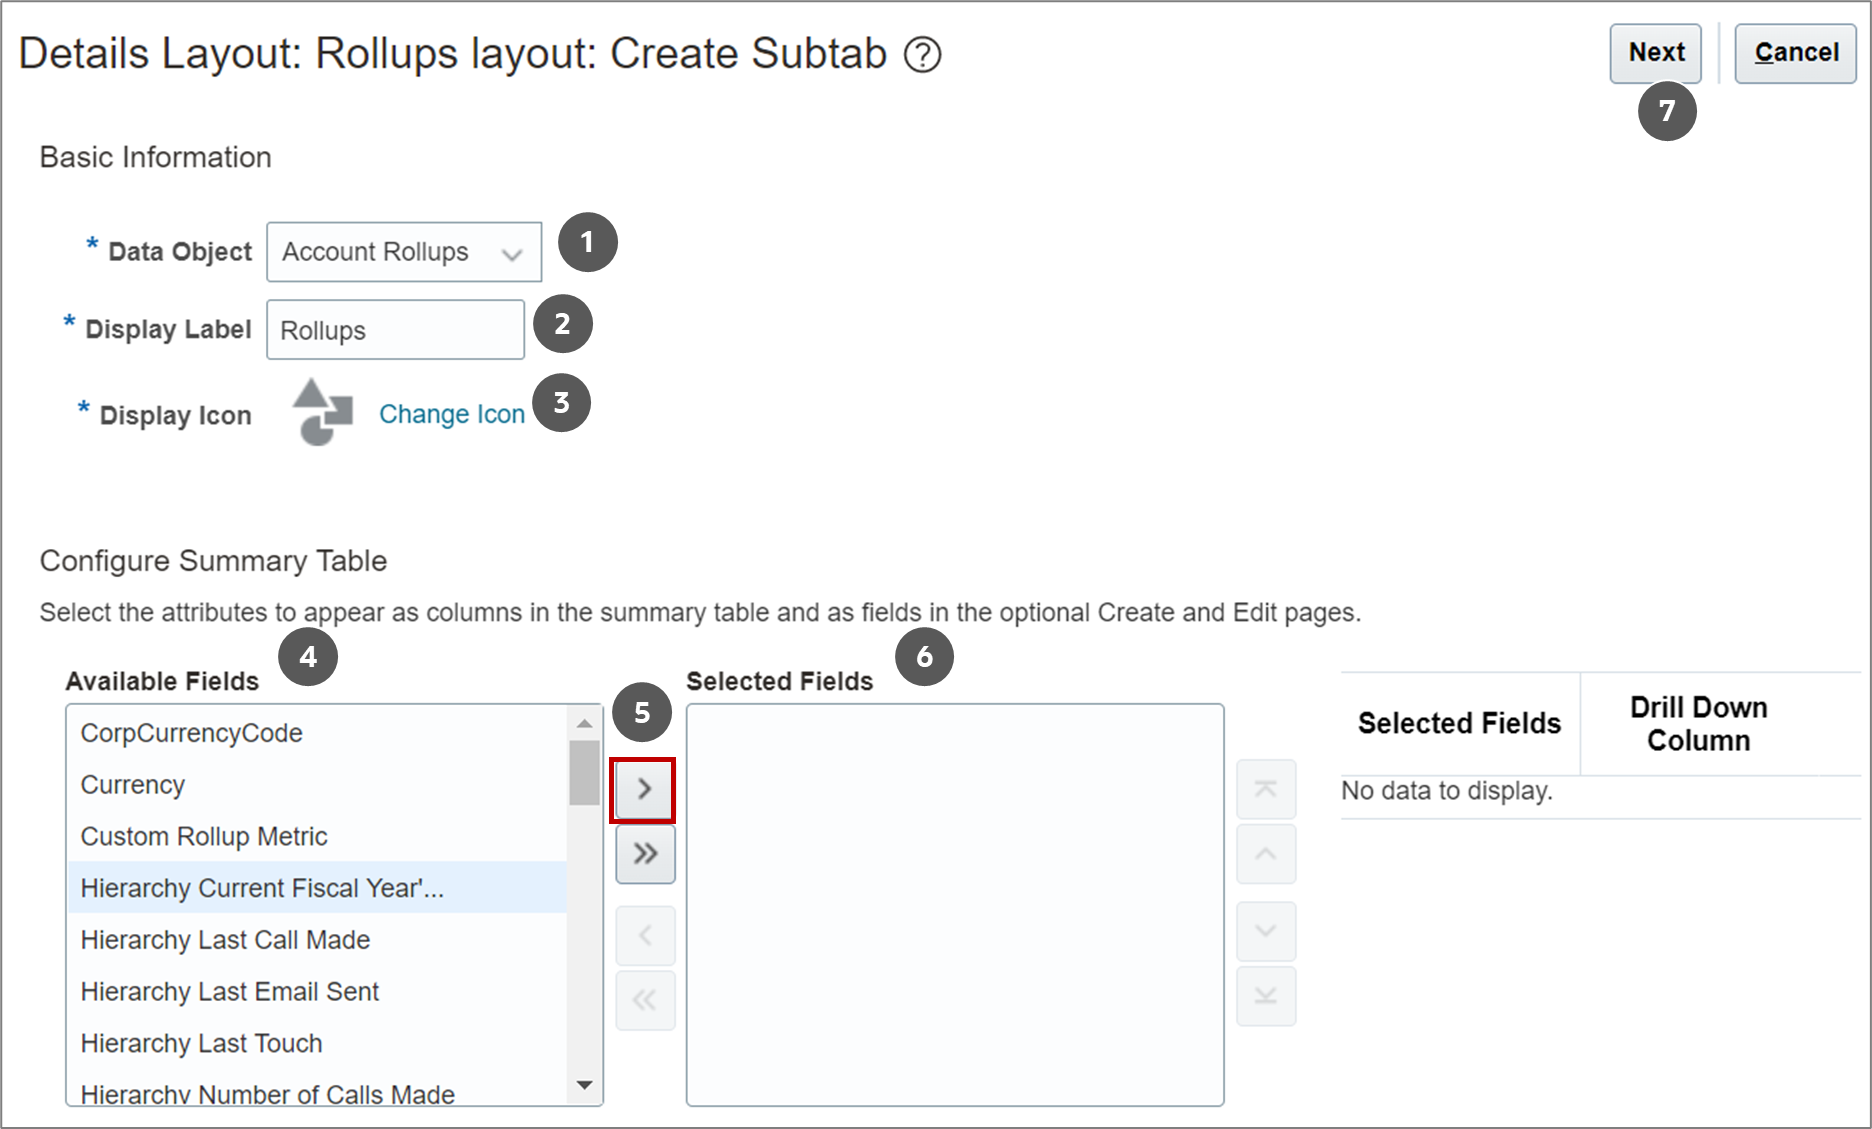 The screenshot shows creating a custom subtab for Rollups for the Account object.